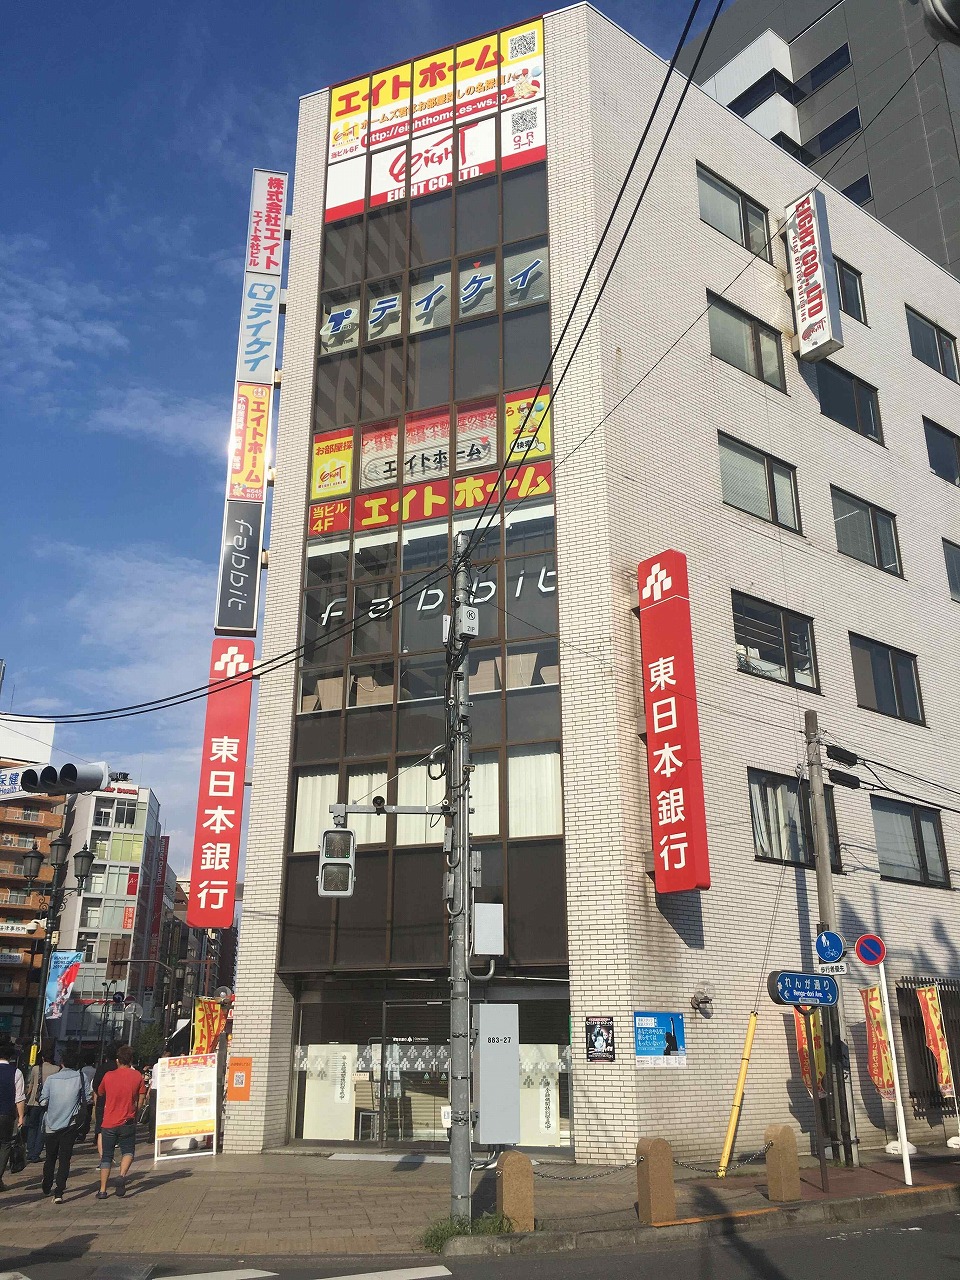 Exterior view of the building with East Japan Bank on the first floor.